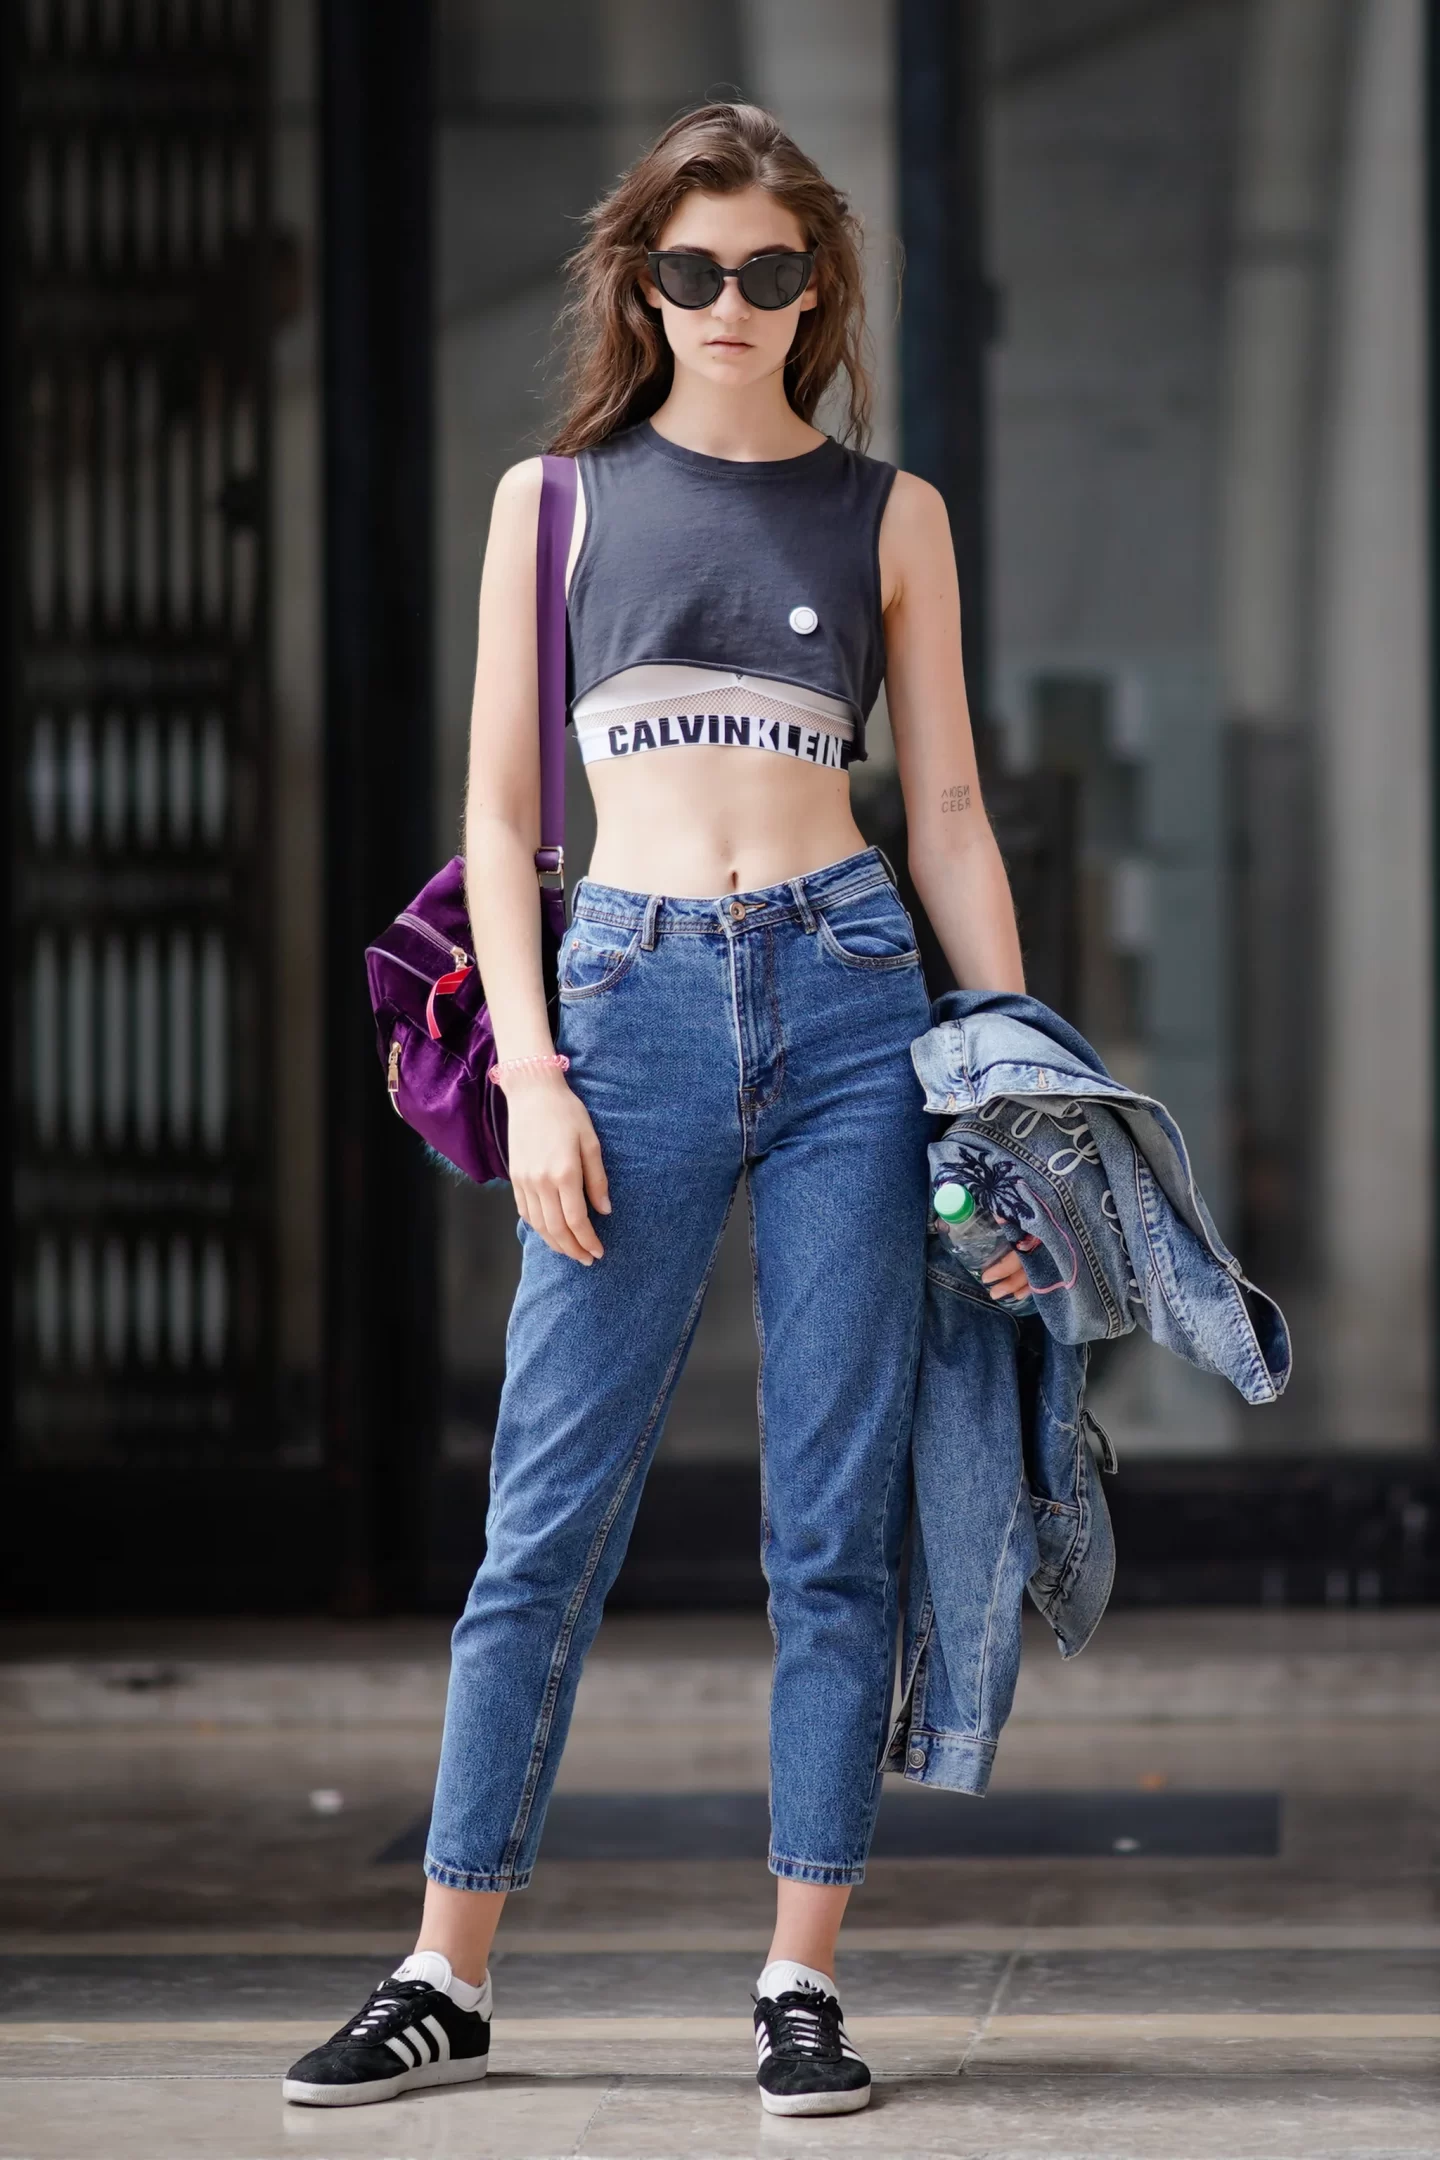 Sports bra with an all jeans look